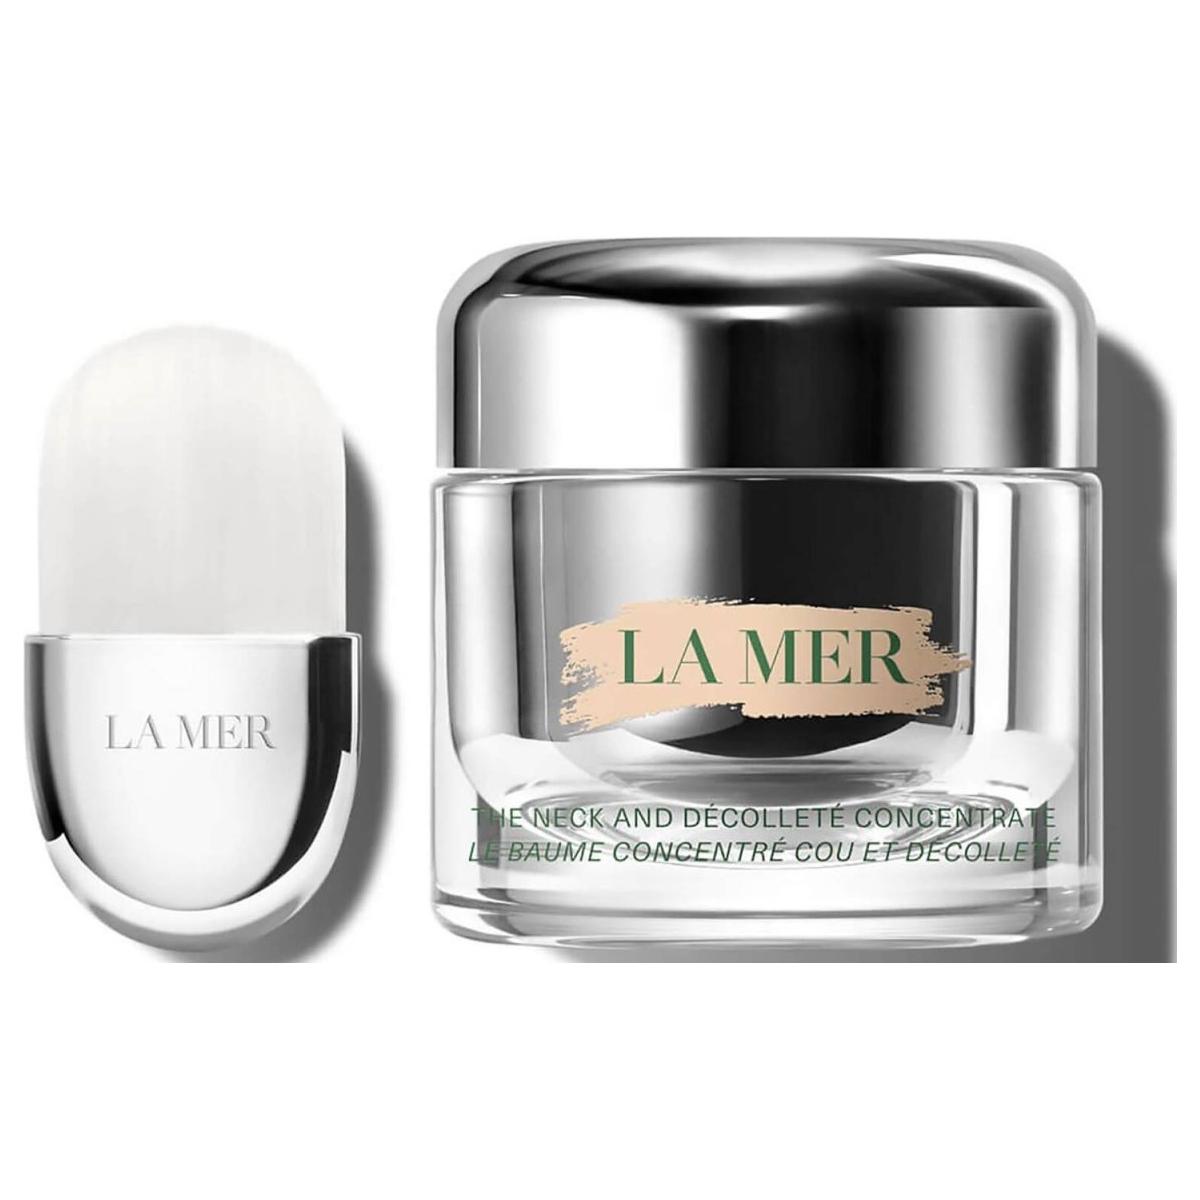 LA MER The Neck and Decollete Concentrate 50ml - DG International Ventures Limited